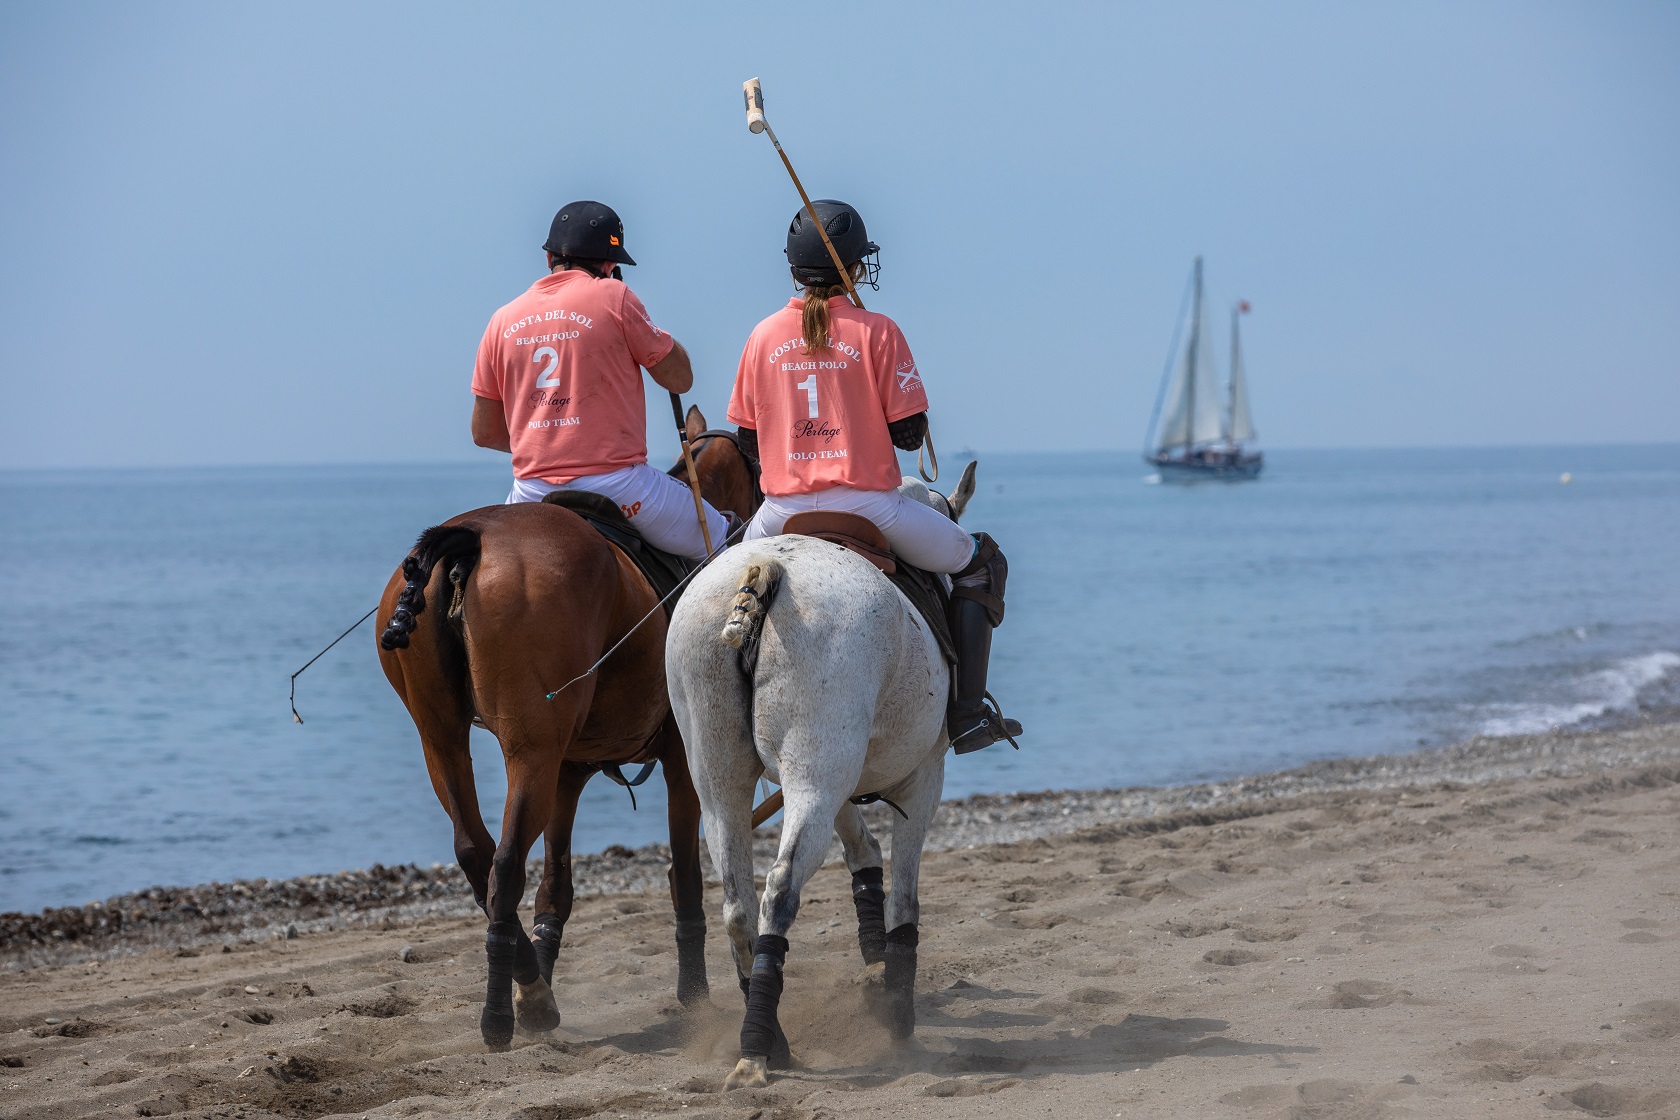 glamour-and-excitement-at-the-first-costa-del-sol-beach-polo-tournament 4 polomagazine